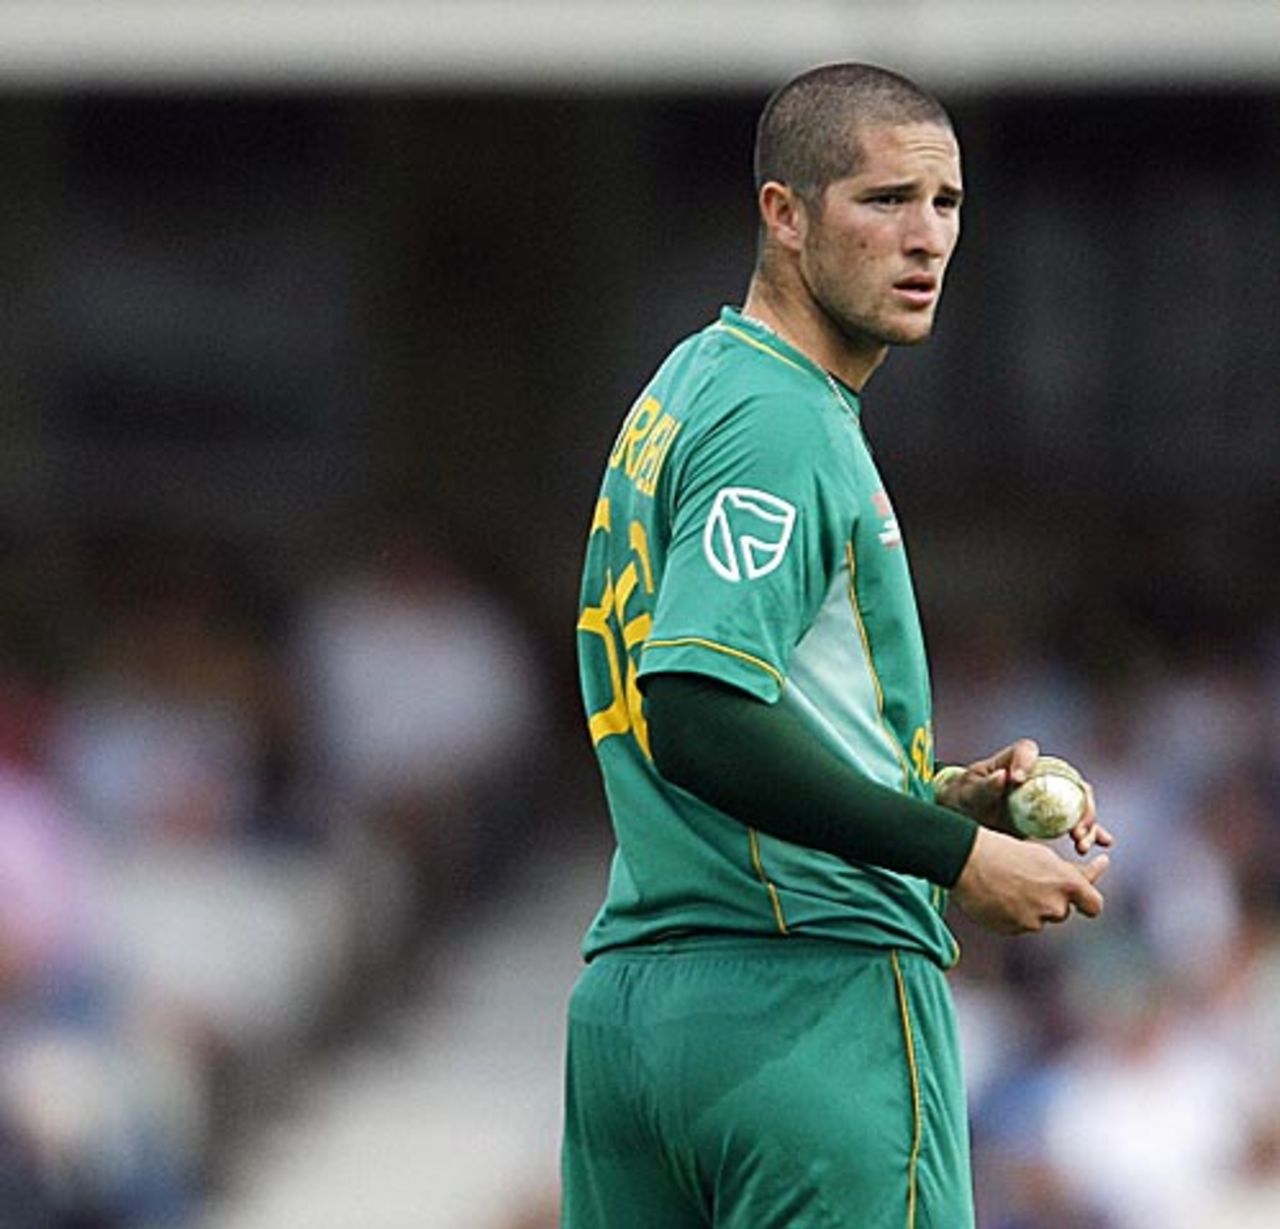 Wayne Parnell took 4 for 13, South Africa v West Indies, ICC World Twenty20 Super Eights, The Oval, June 13, 2009 